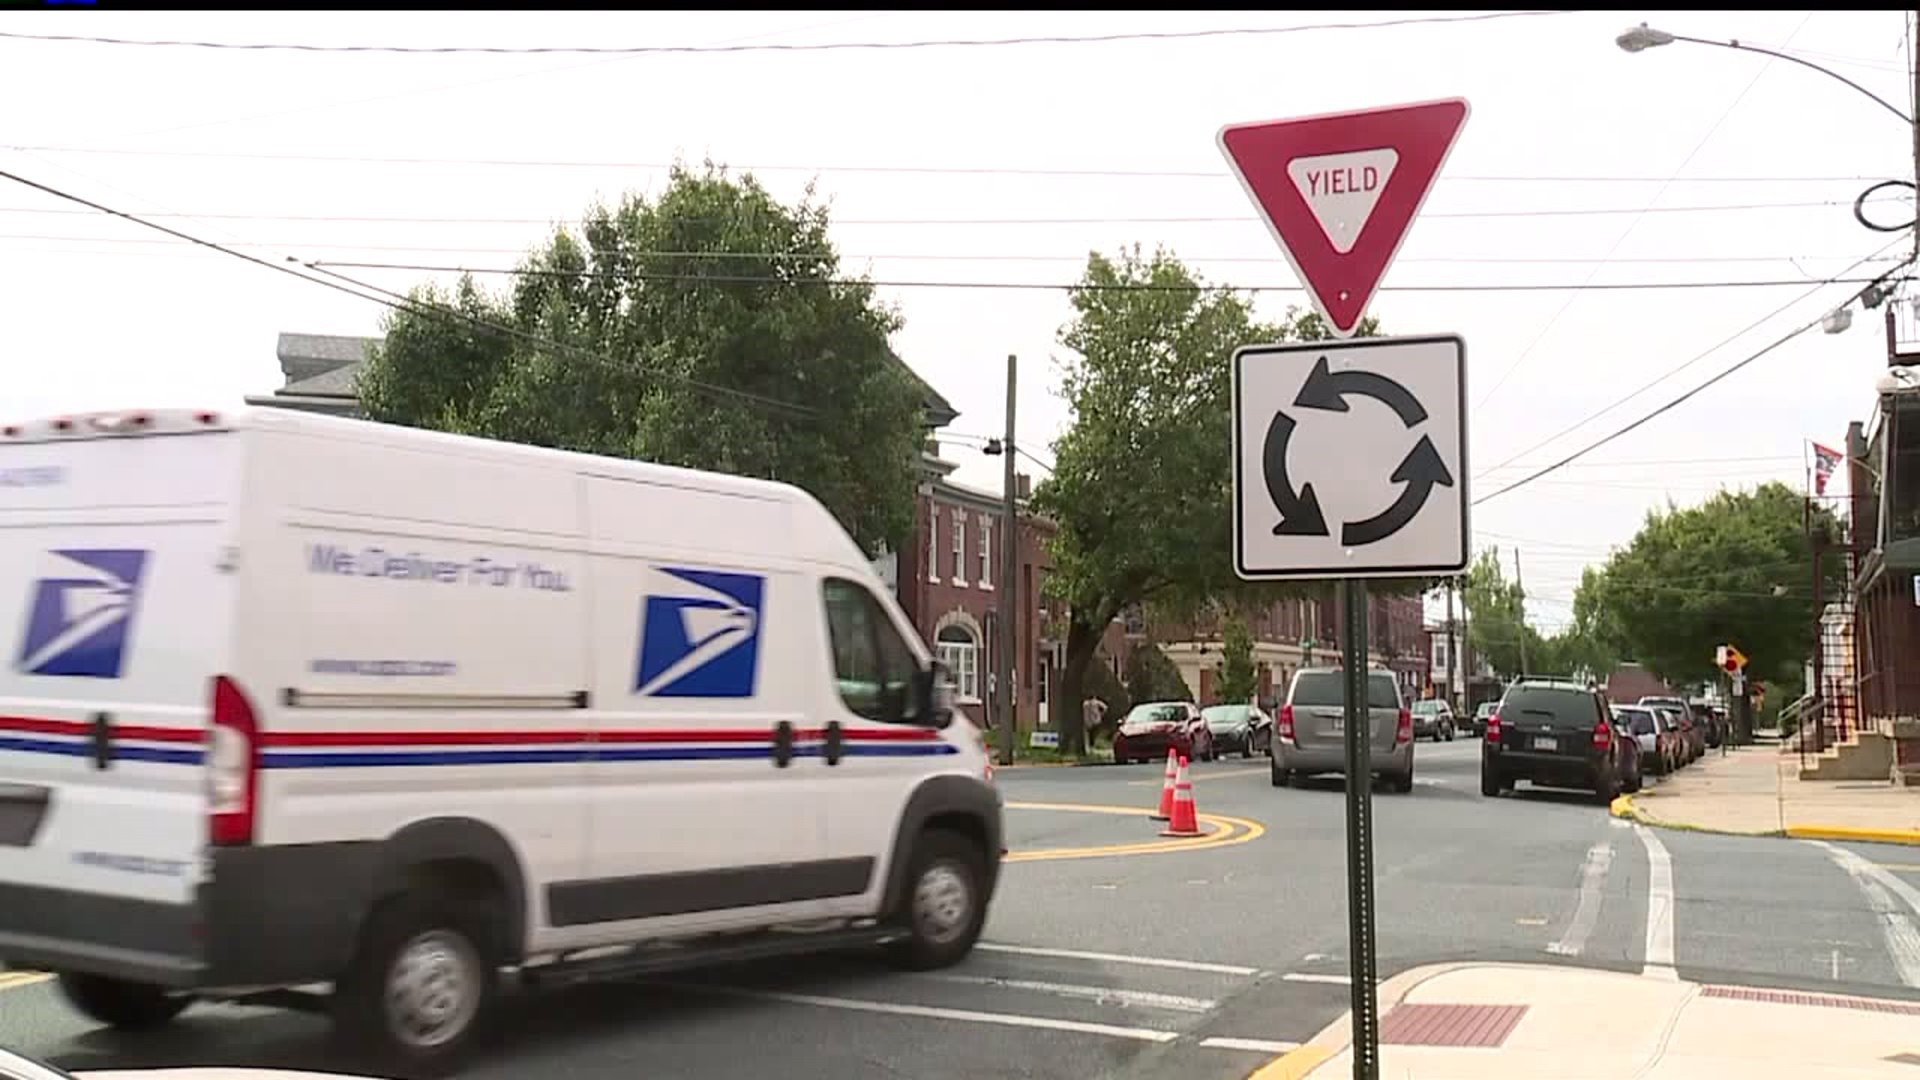 Mini-roundabout causes some confusion for drivers in Lancaster